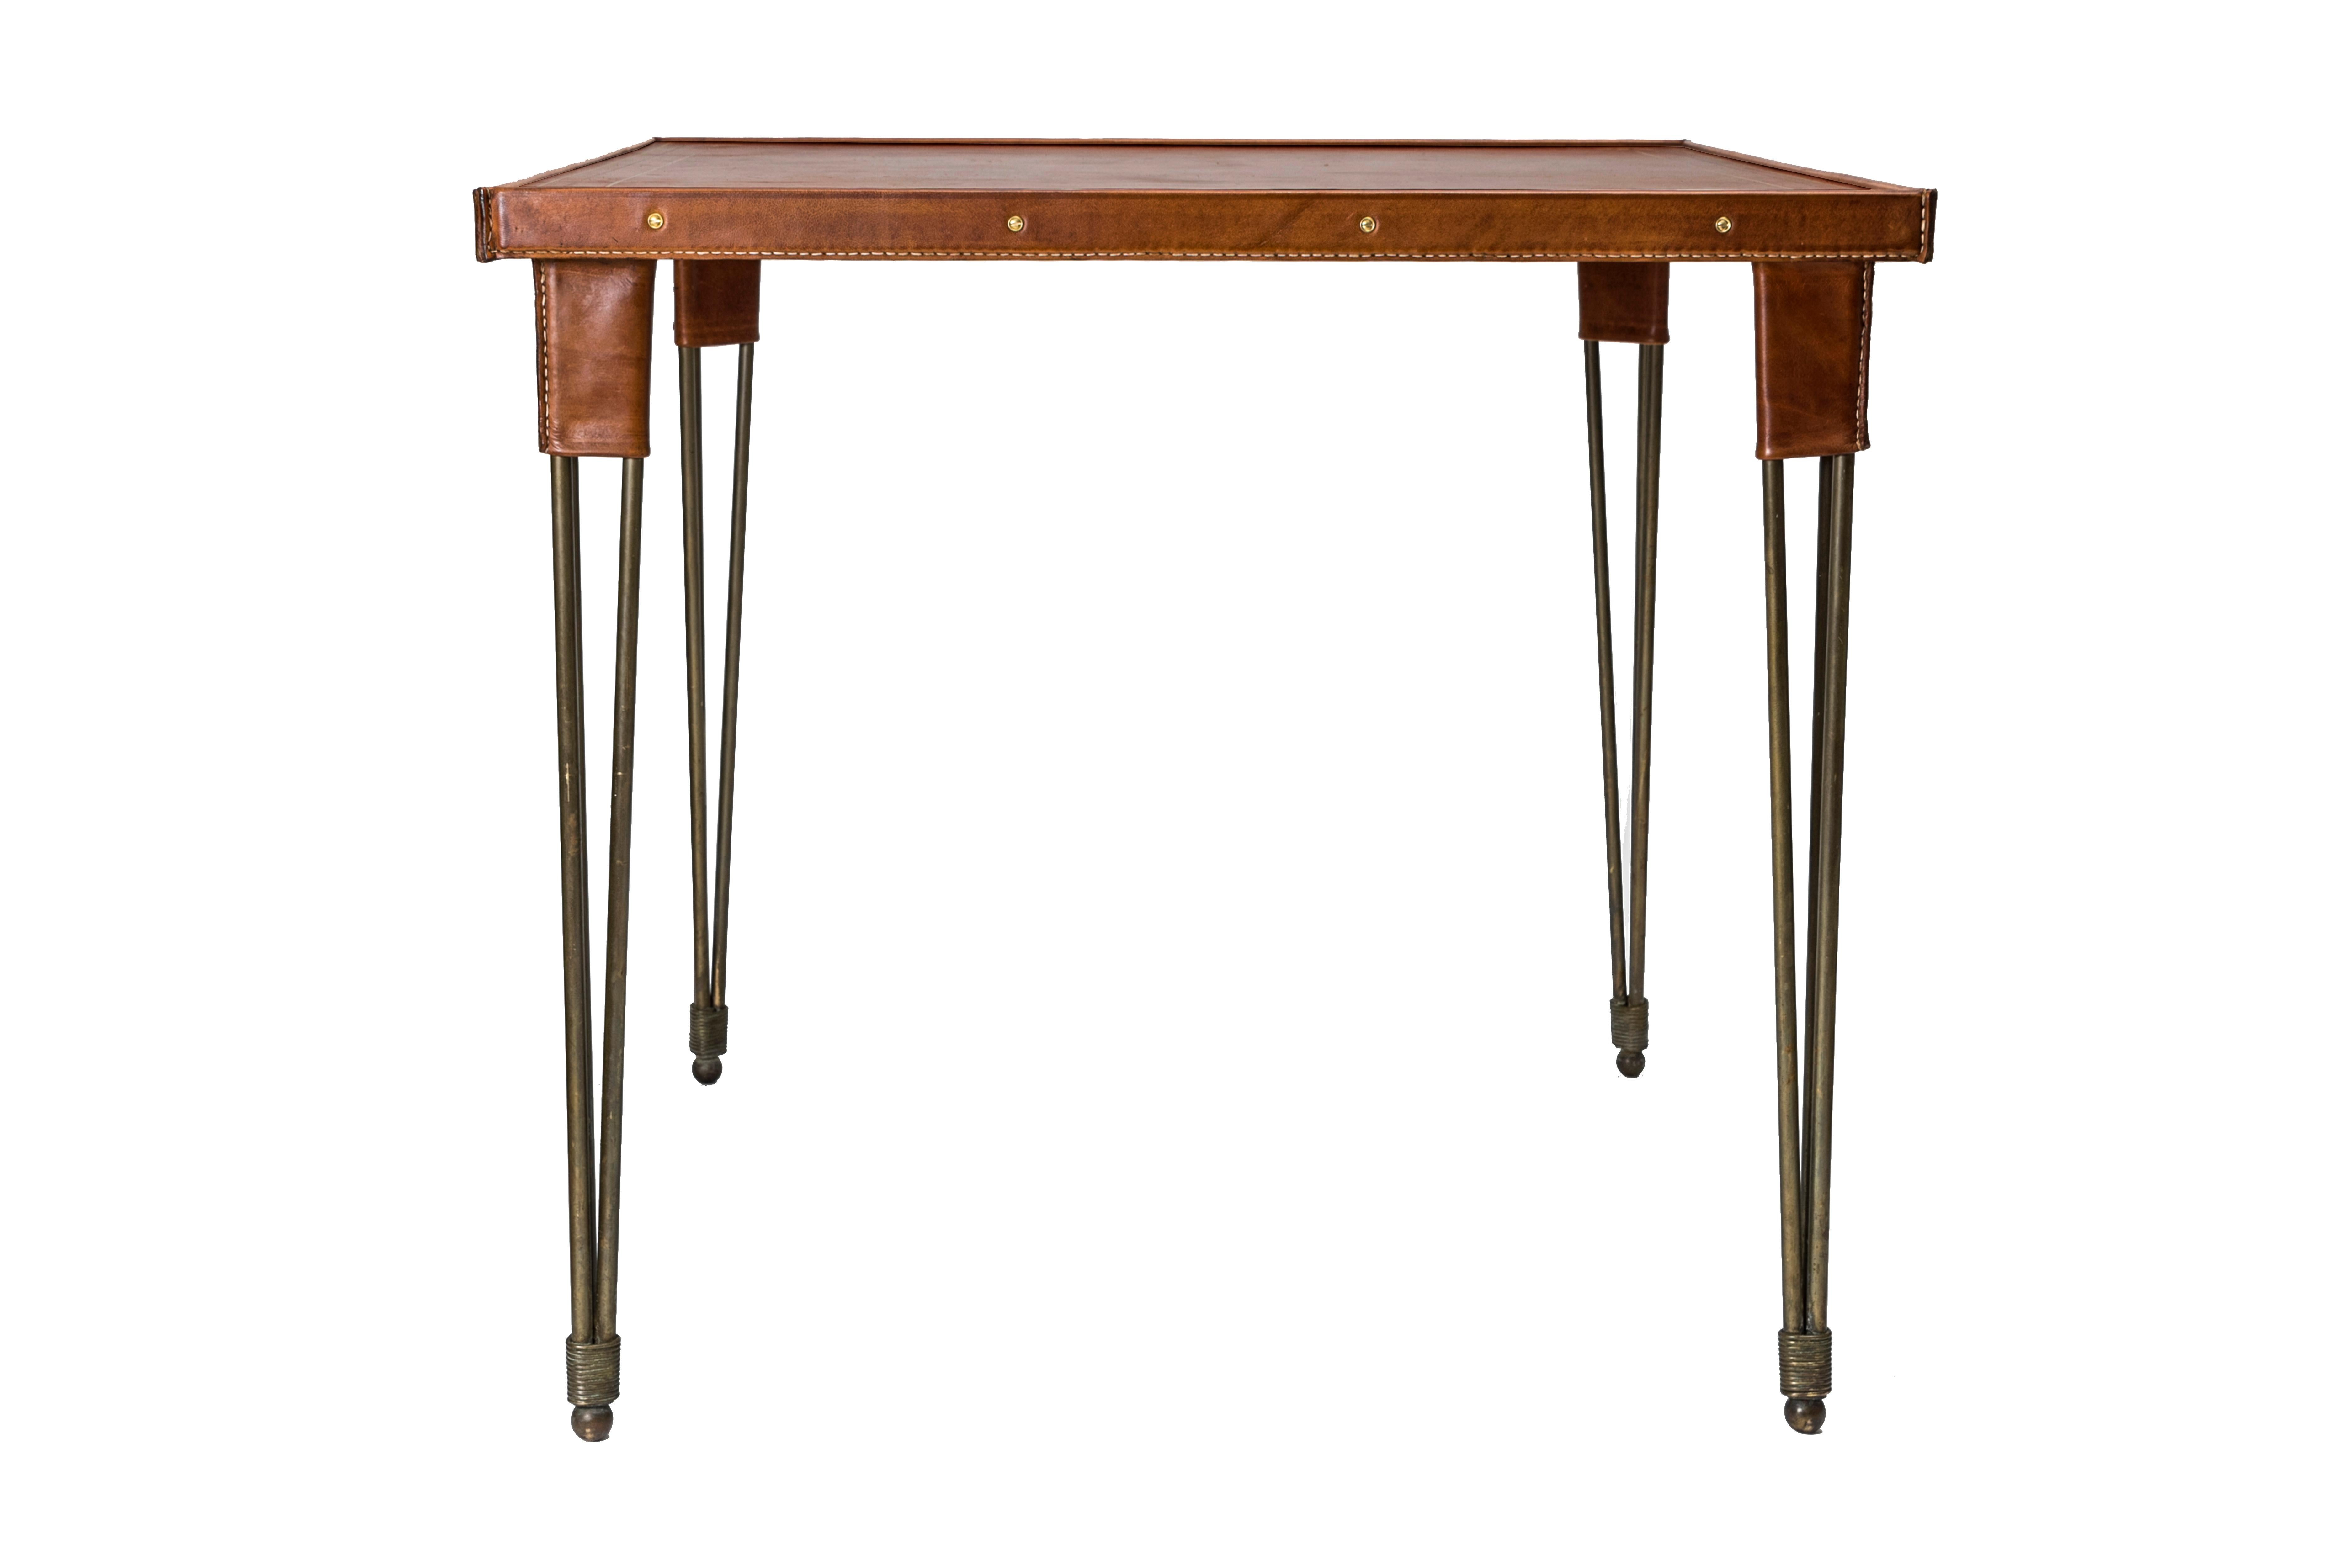 Rare stitched leather game table by Jacques Adnet.